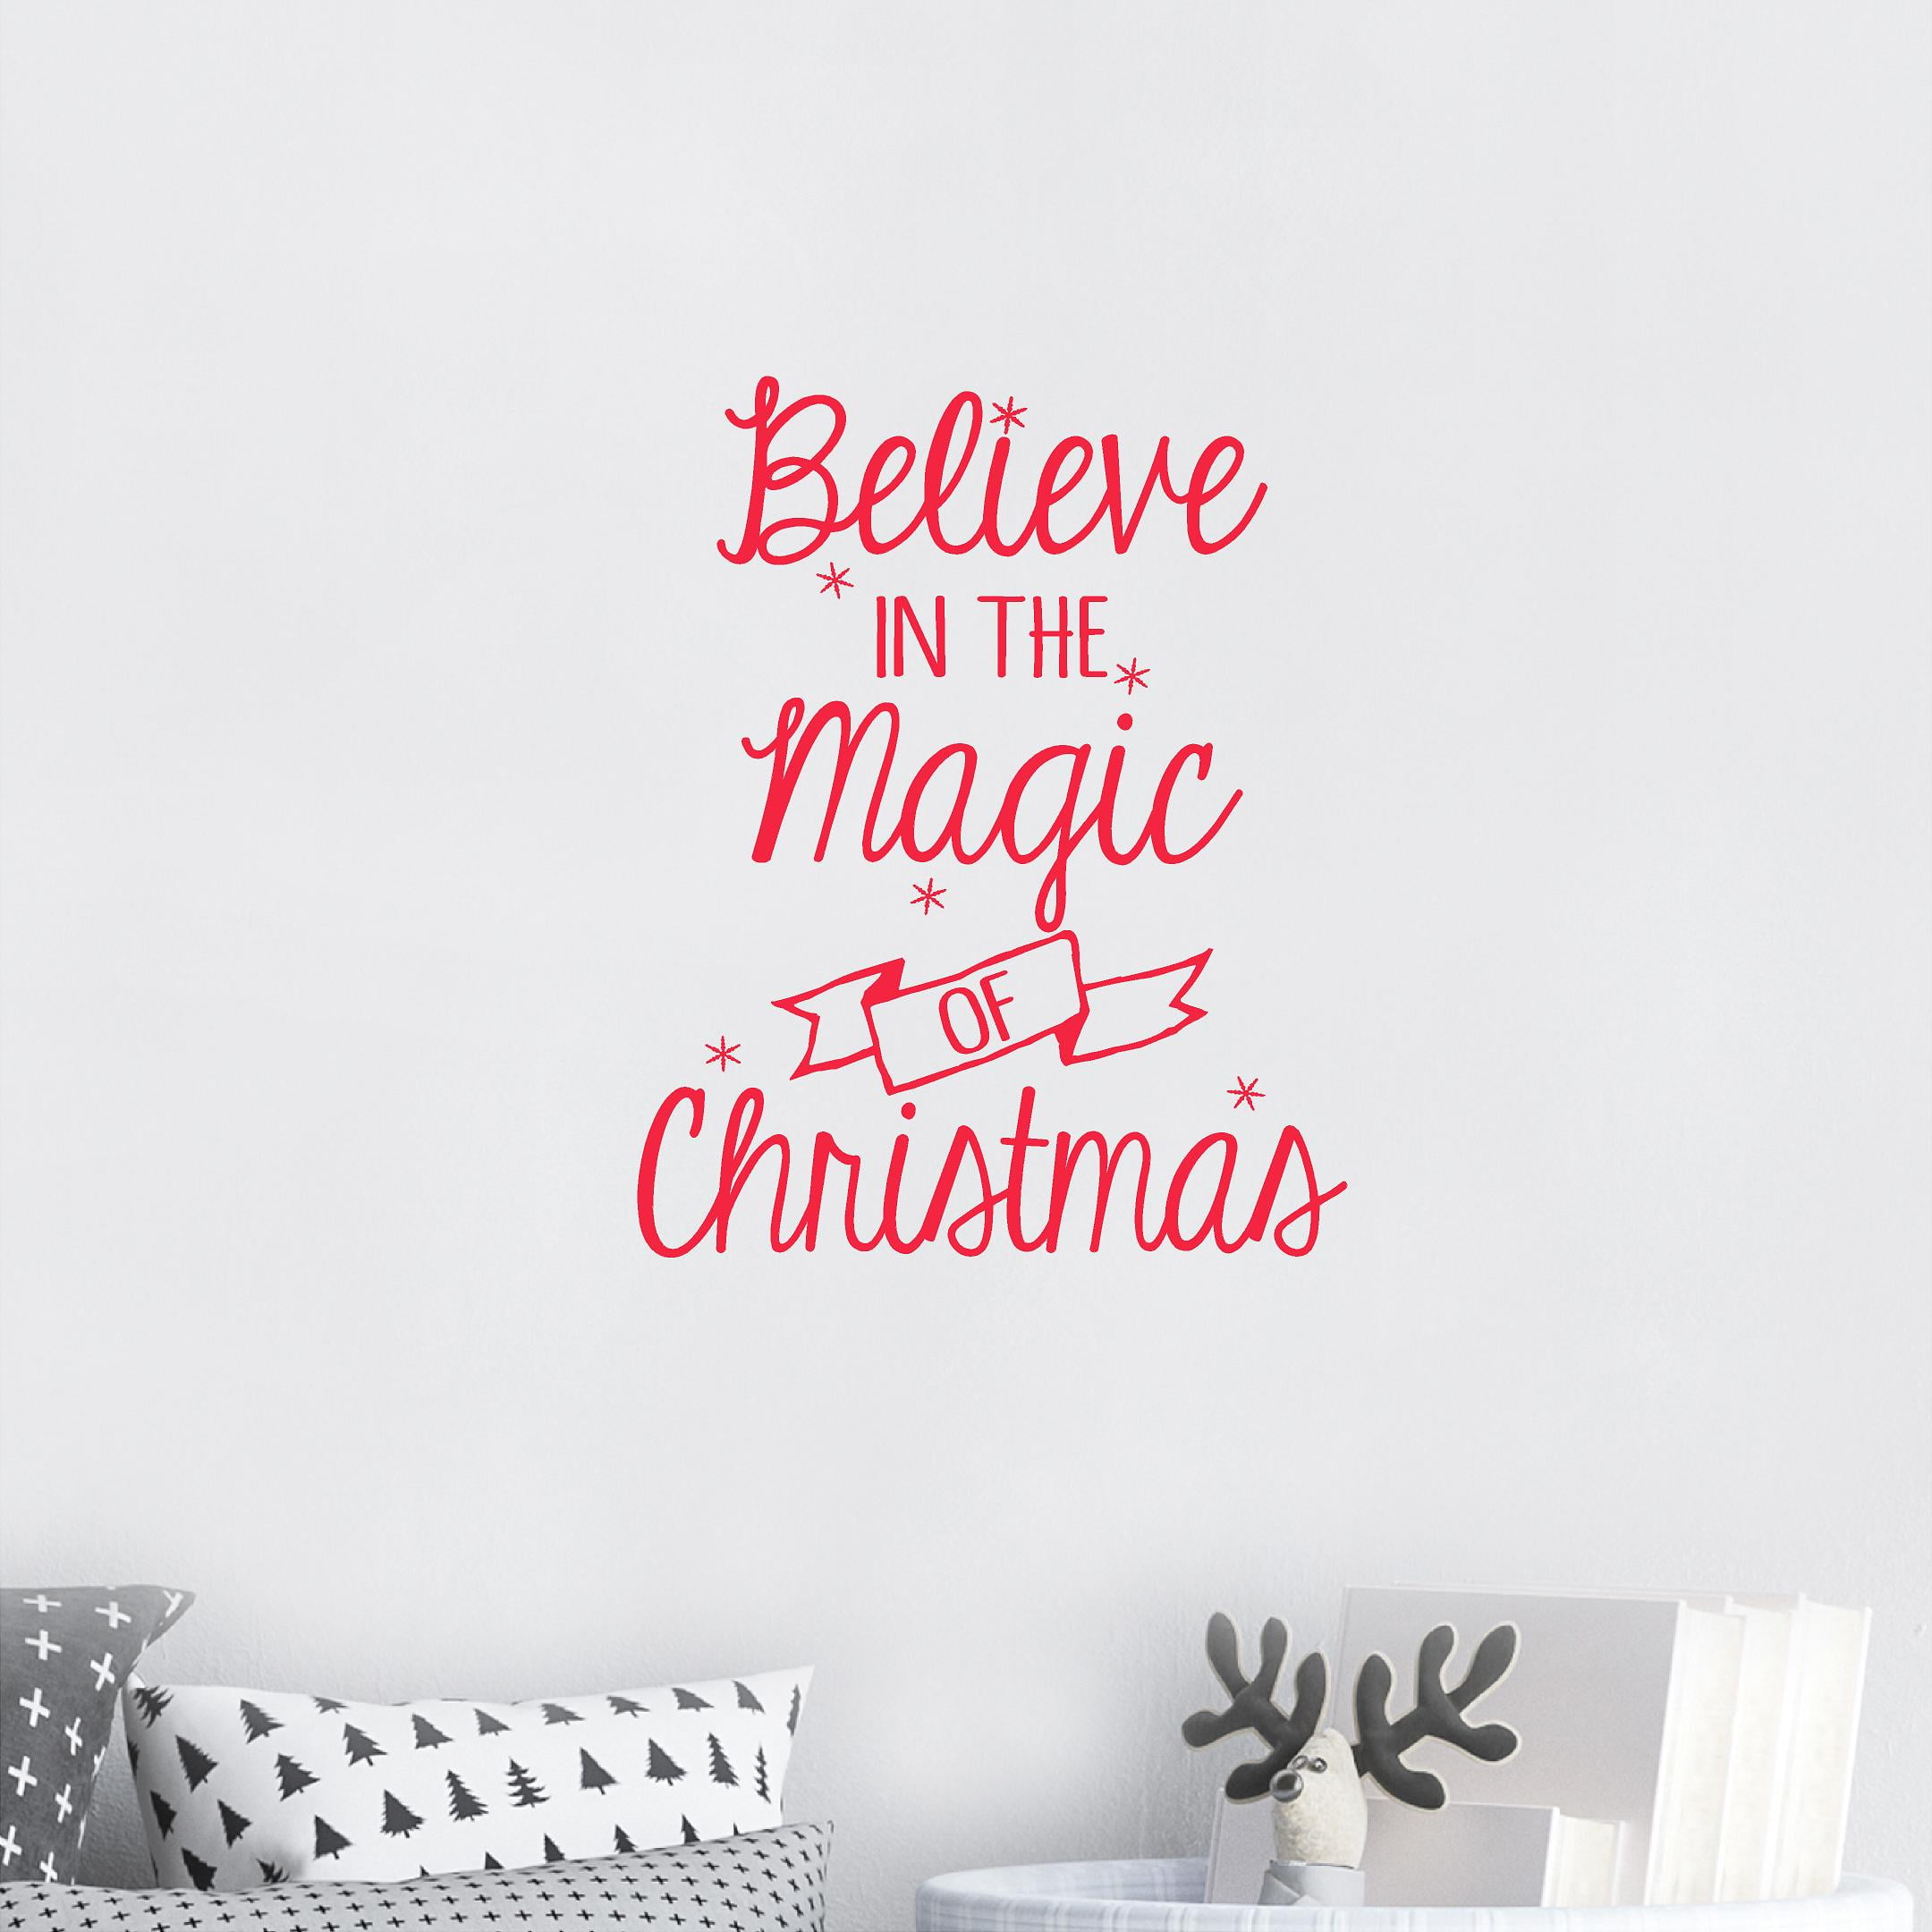 Christmas Wine Bottle Quote The Wine is So Delightful Decal Vinyl Sticker Decor 